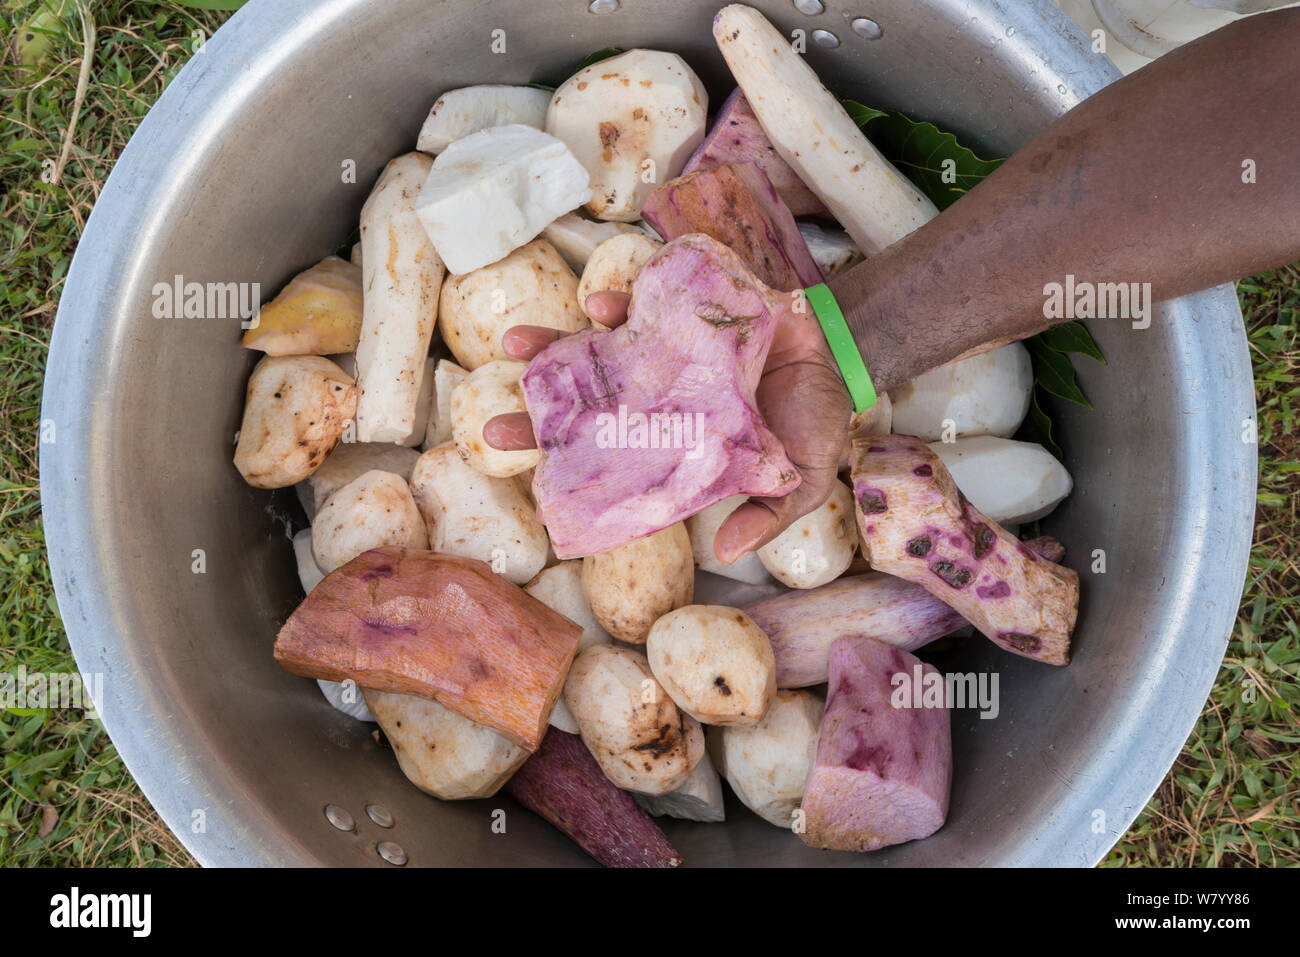 Food preparation using different root crops including taro, cassava, yam, Nukusa Village, Undu Point, Macuata Province, Fiji, South Pacific.  August 2013 Stock Photo